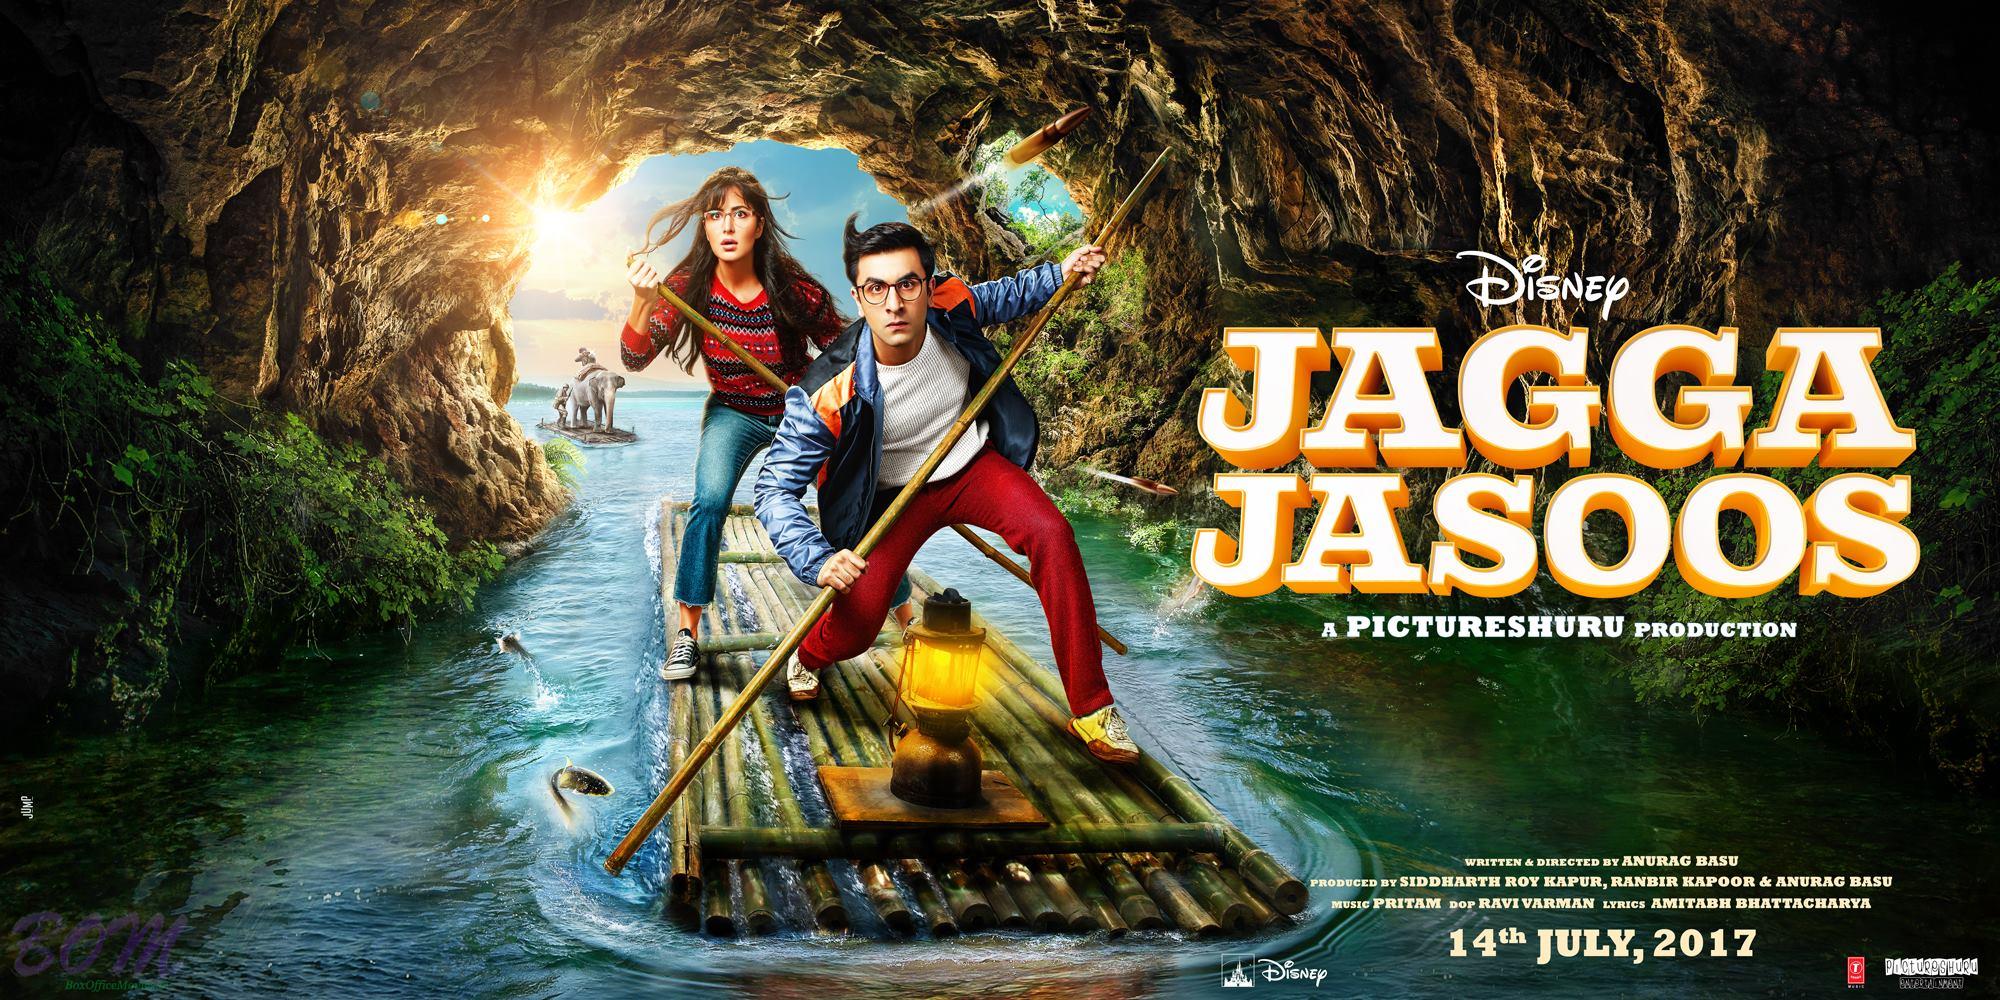 Jagga Jasoos new poster with release date